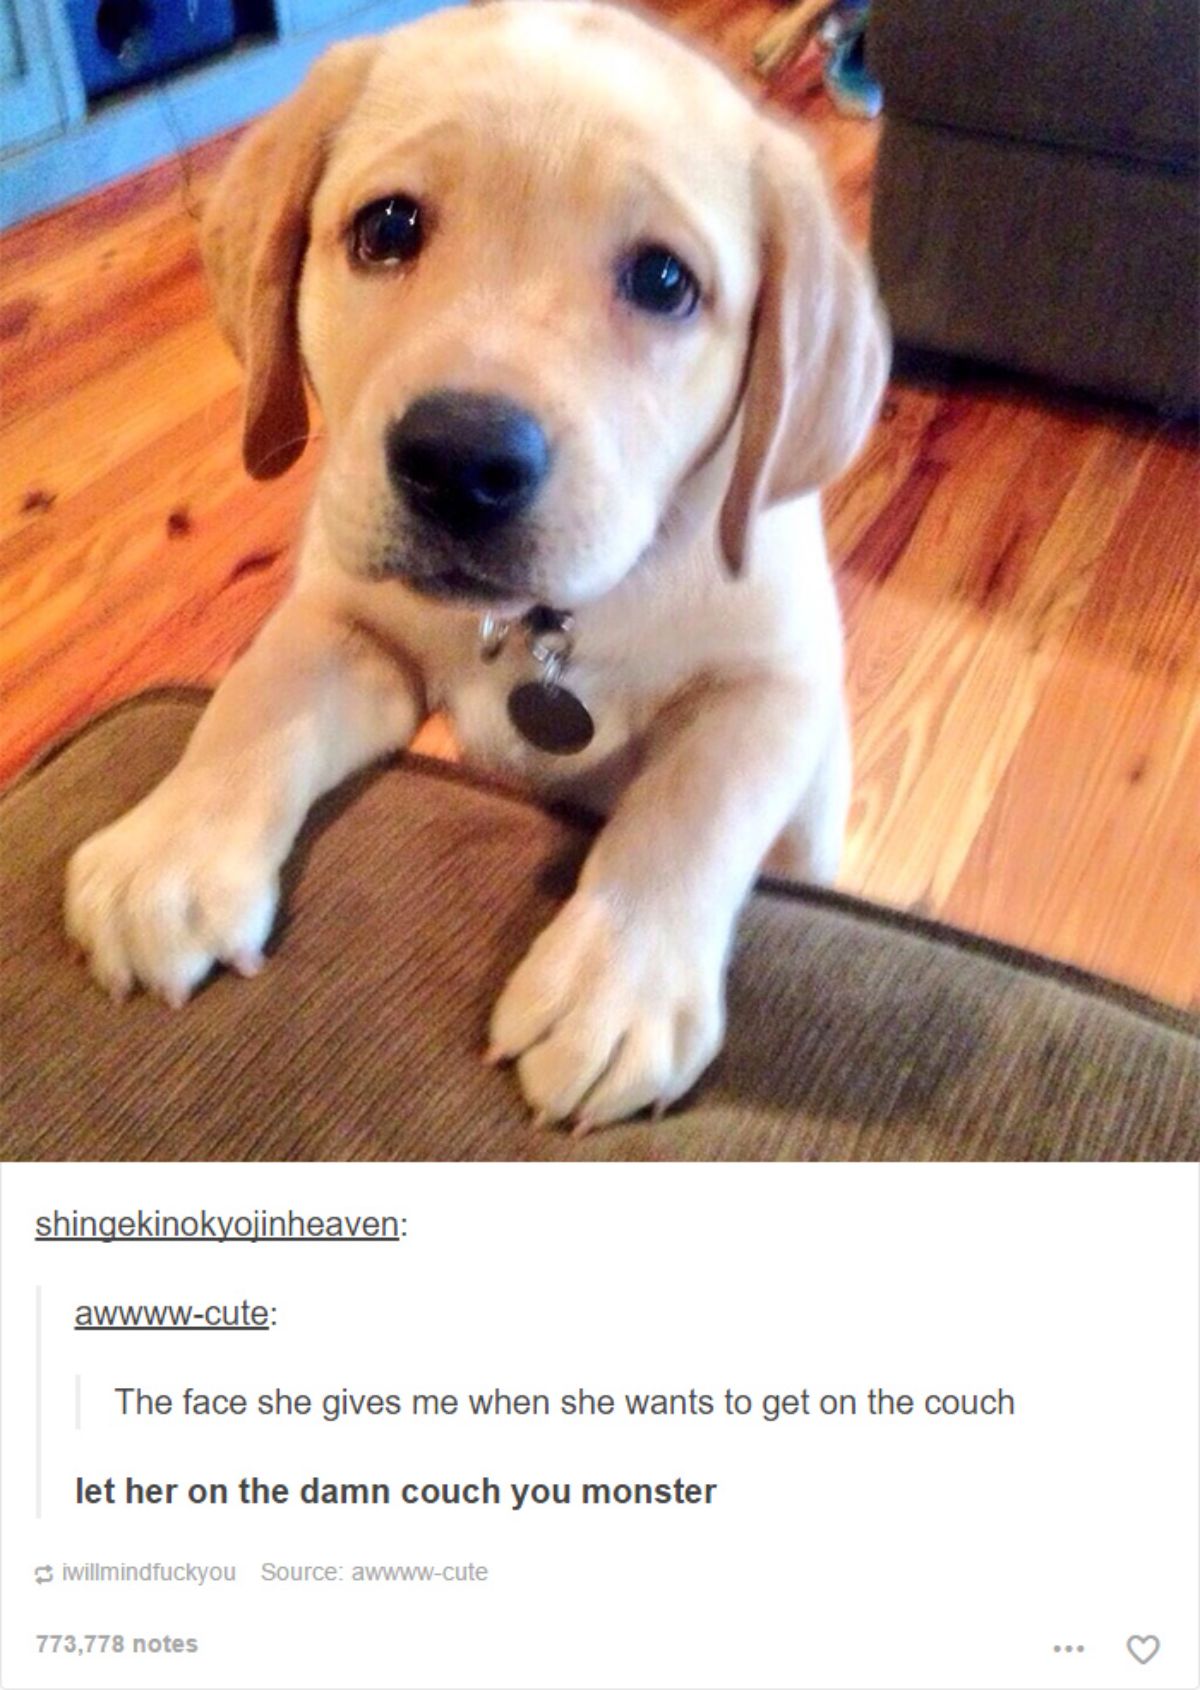 tumblr post of golden retriever puppy with paws on a couch and caption says this is the face she gives when she wants to get on the couch and someone saying let her up